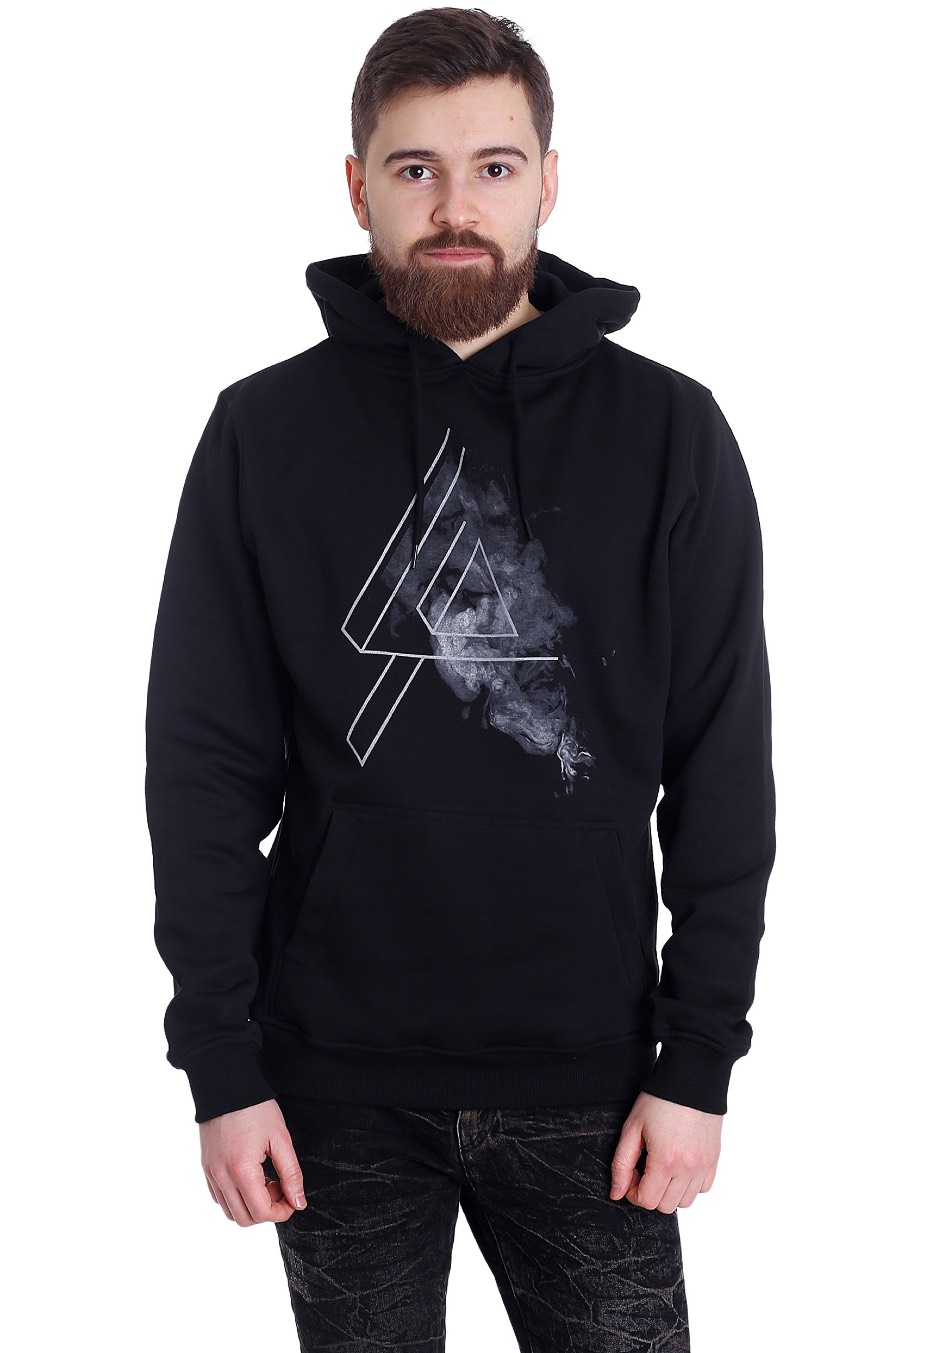 Discover Your Linkin Park Paradise: Linkin Park Store is Here